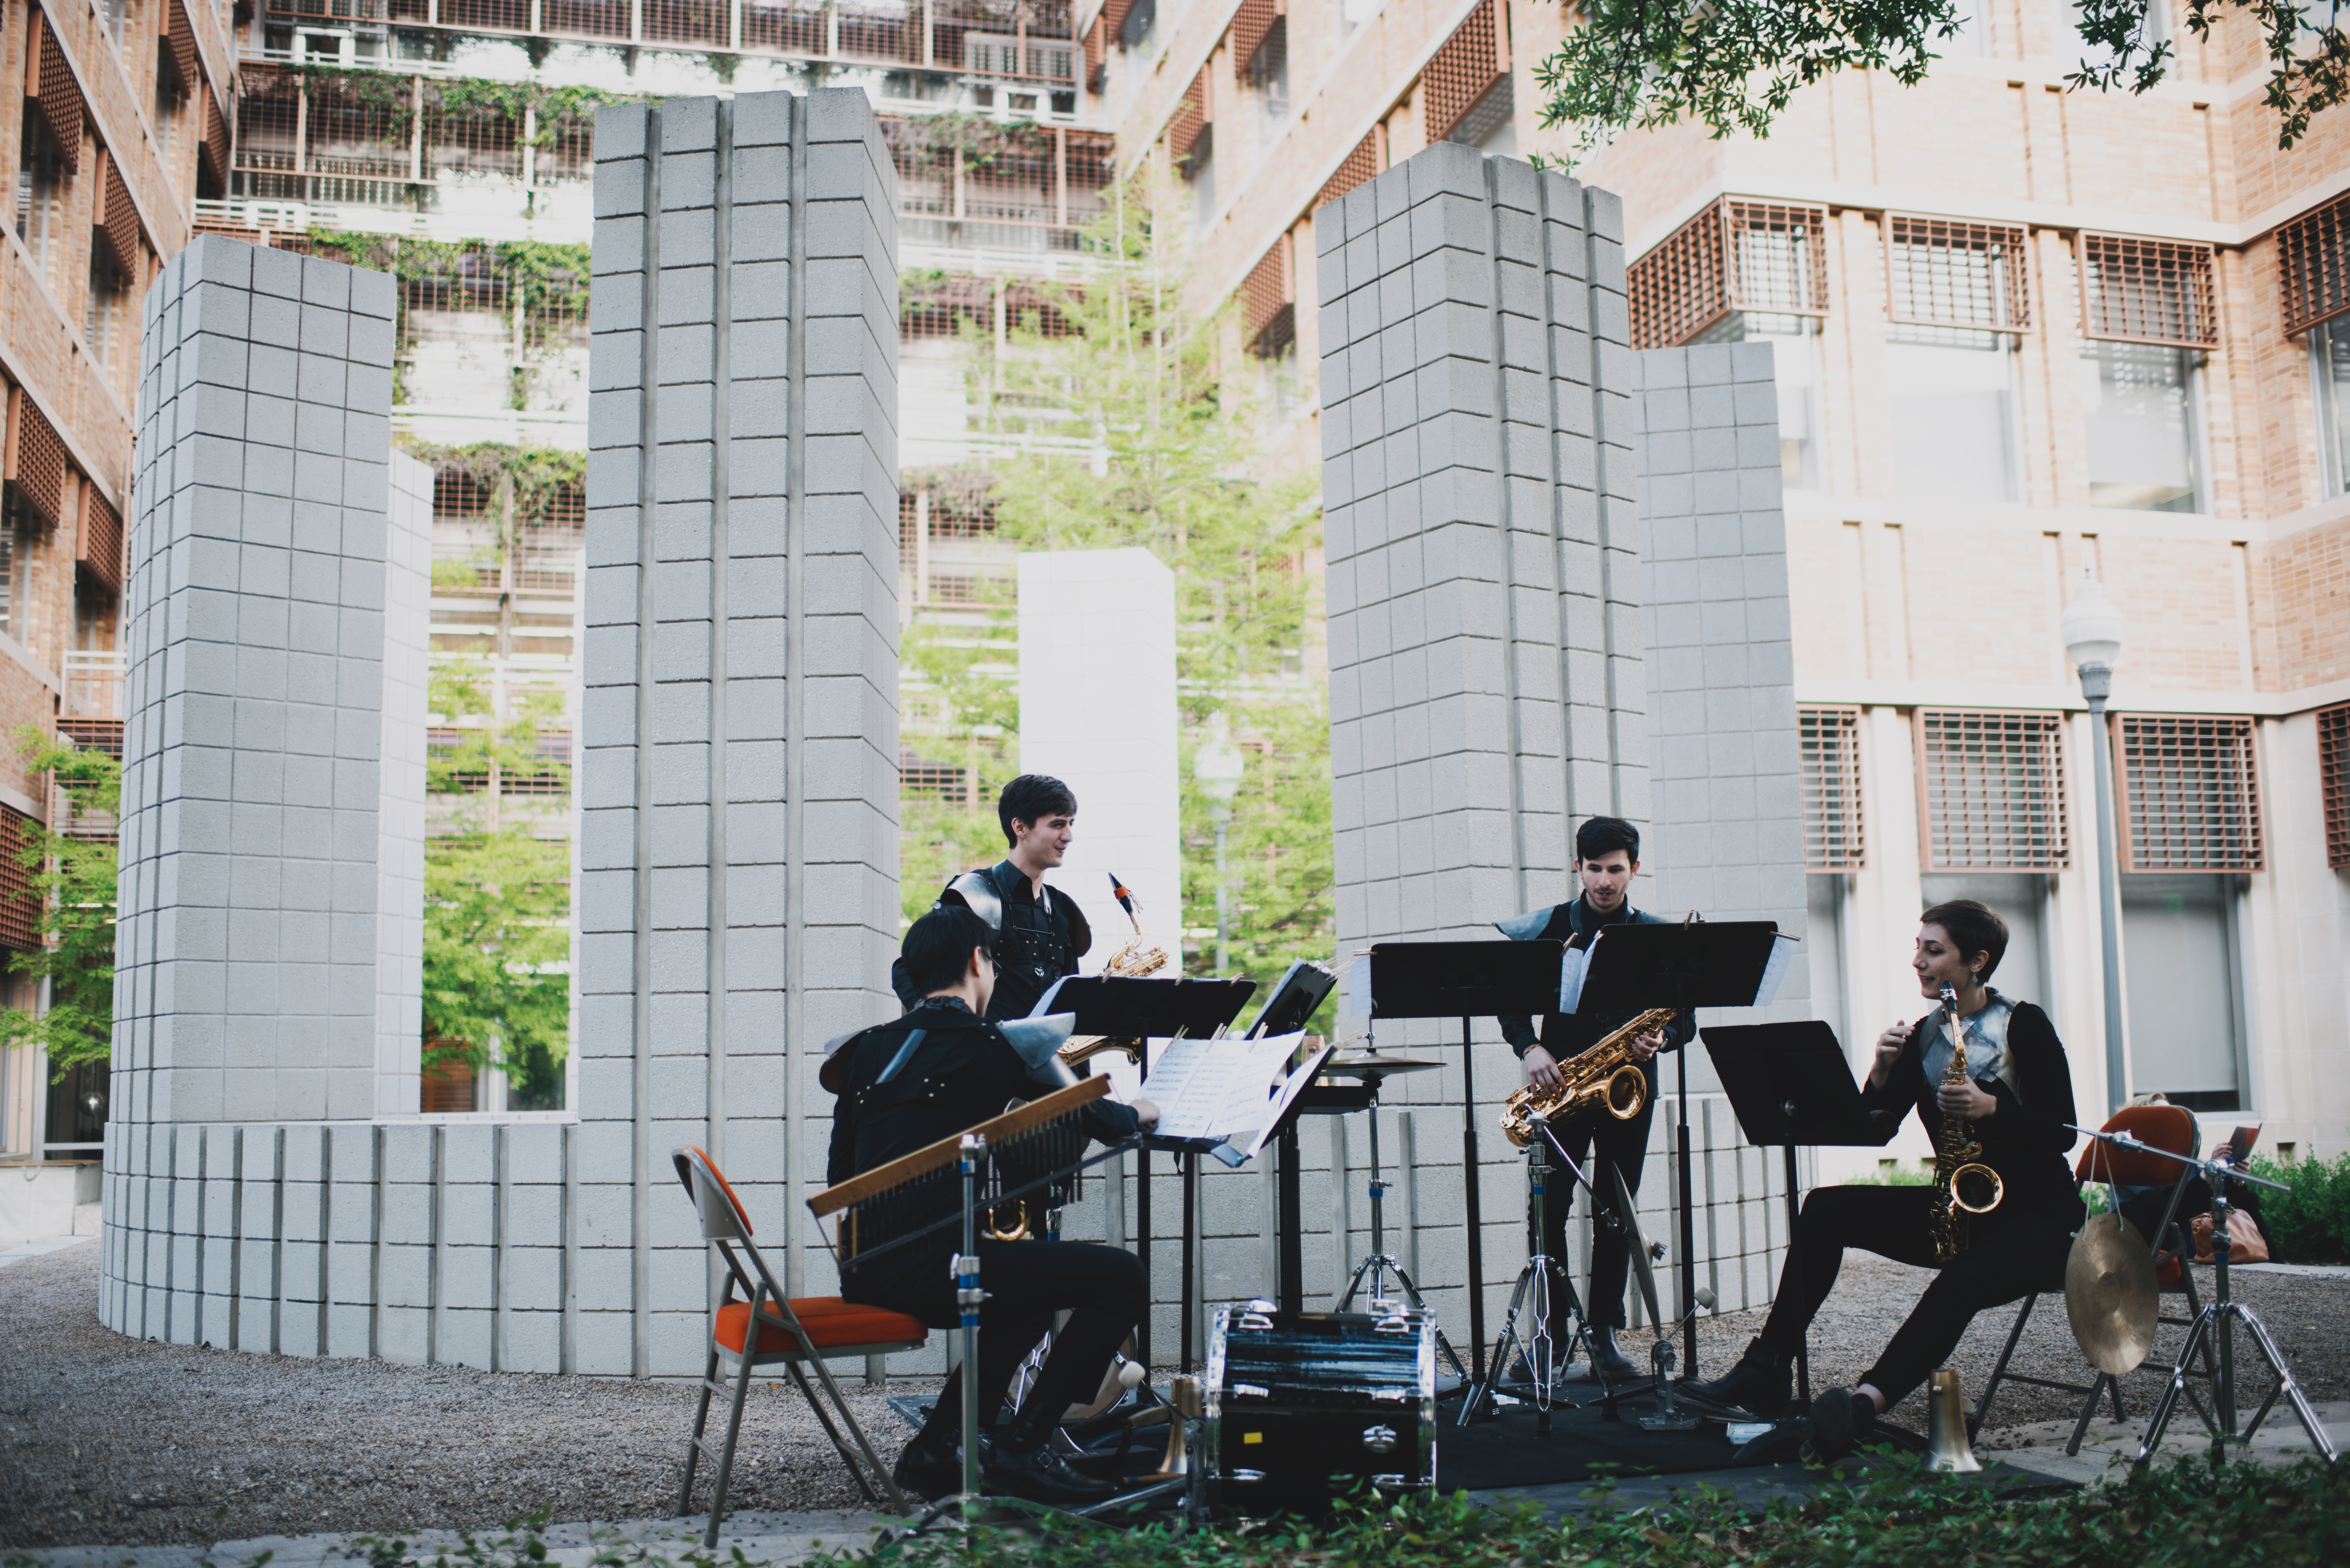 Four performers dressed in black play an assortment of instruments in front of Sol LeWitt's "Circle with Towers" a white concrete structure with tall towers topping a low wall.